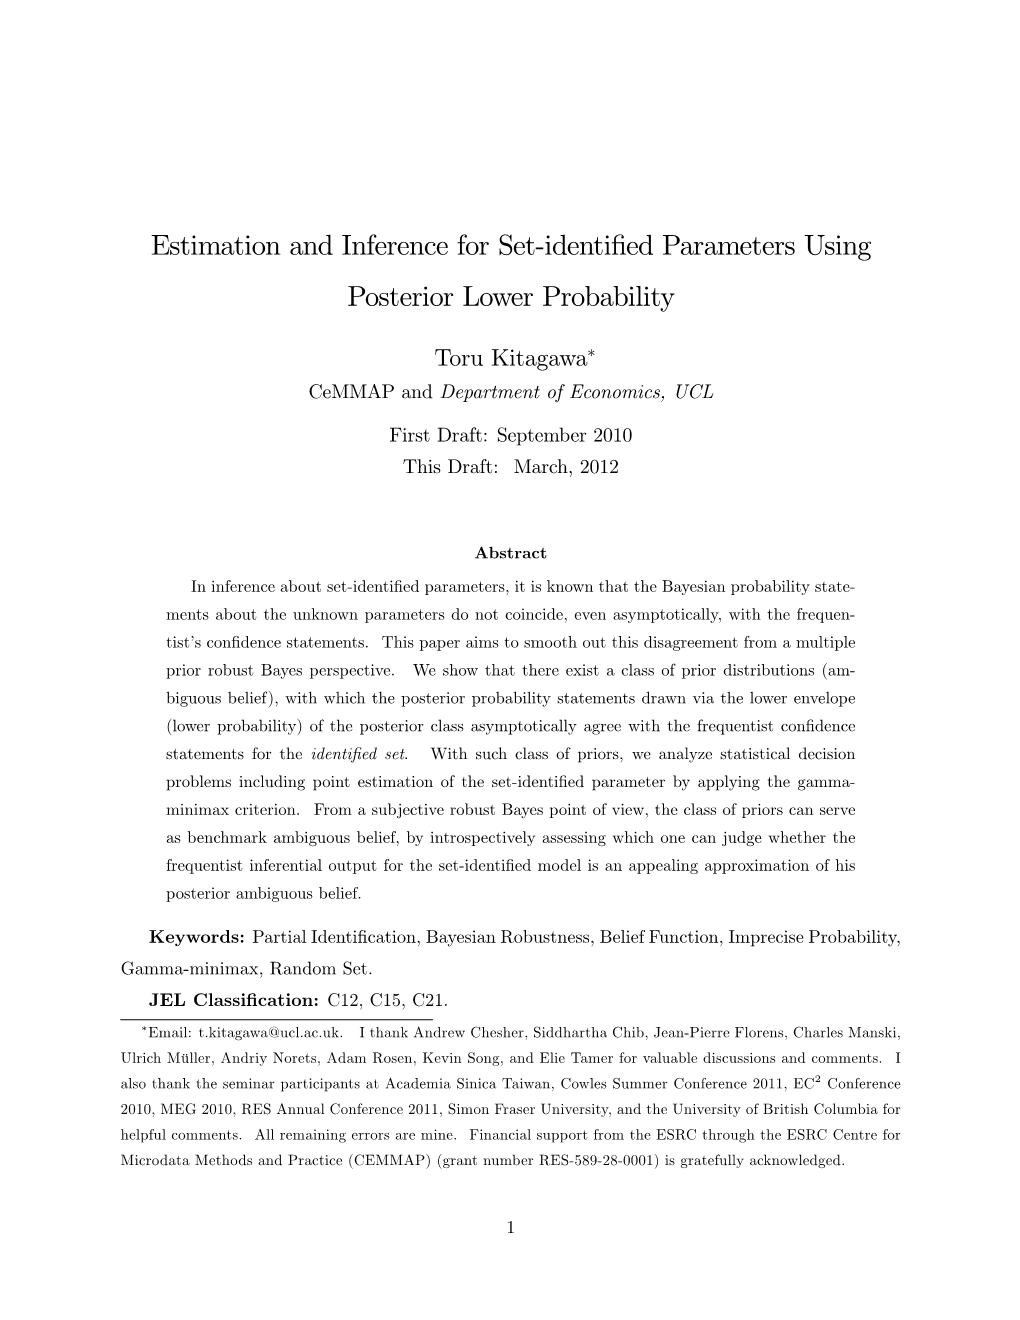 Estimation and Inference for Set&Identified Parameters Using Posterior Lower Probability